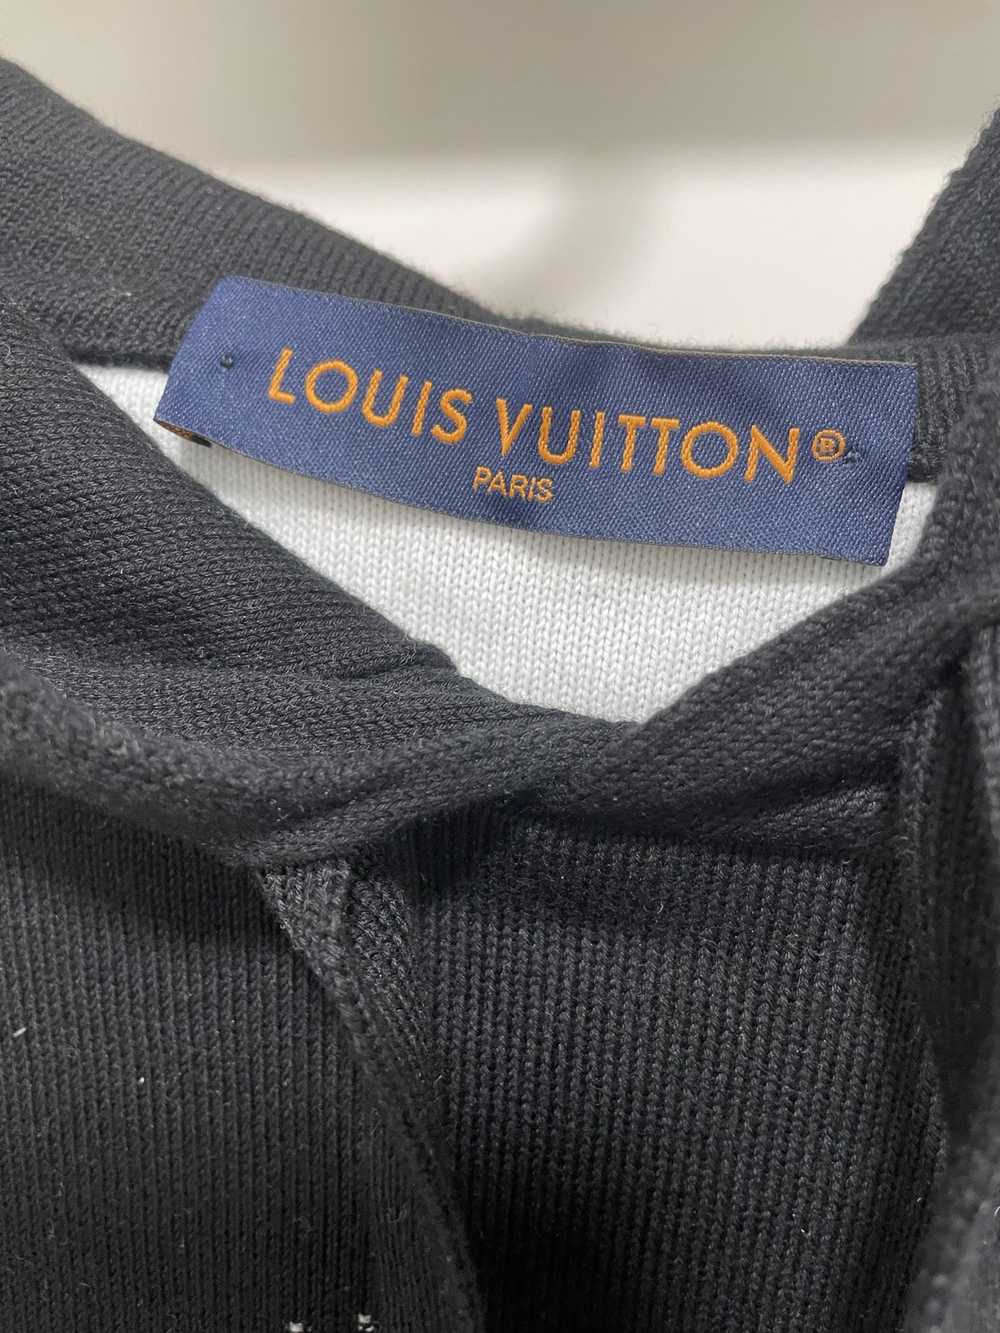 Buy Louis Vuitton 21SS Monogram Circle Cut Hoodie RM211Q RLE HKY43W  Pullover Hoodie Black XS Black from Japan - Buy authentic Plus exclusive  items from Japan